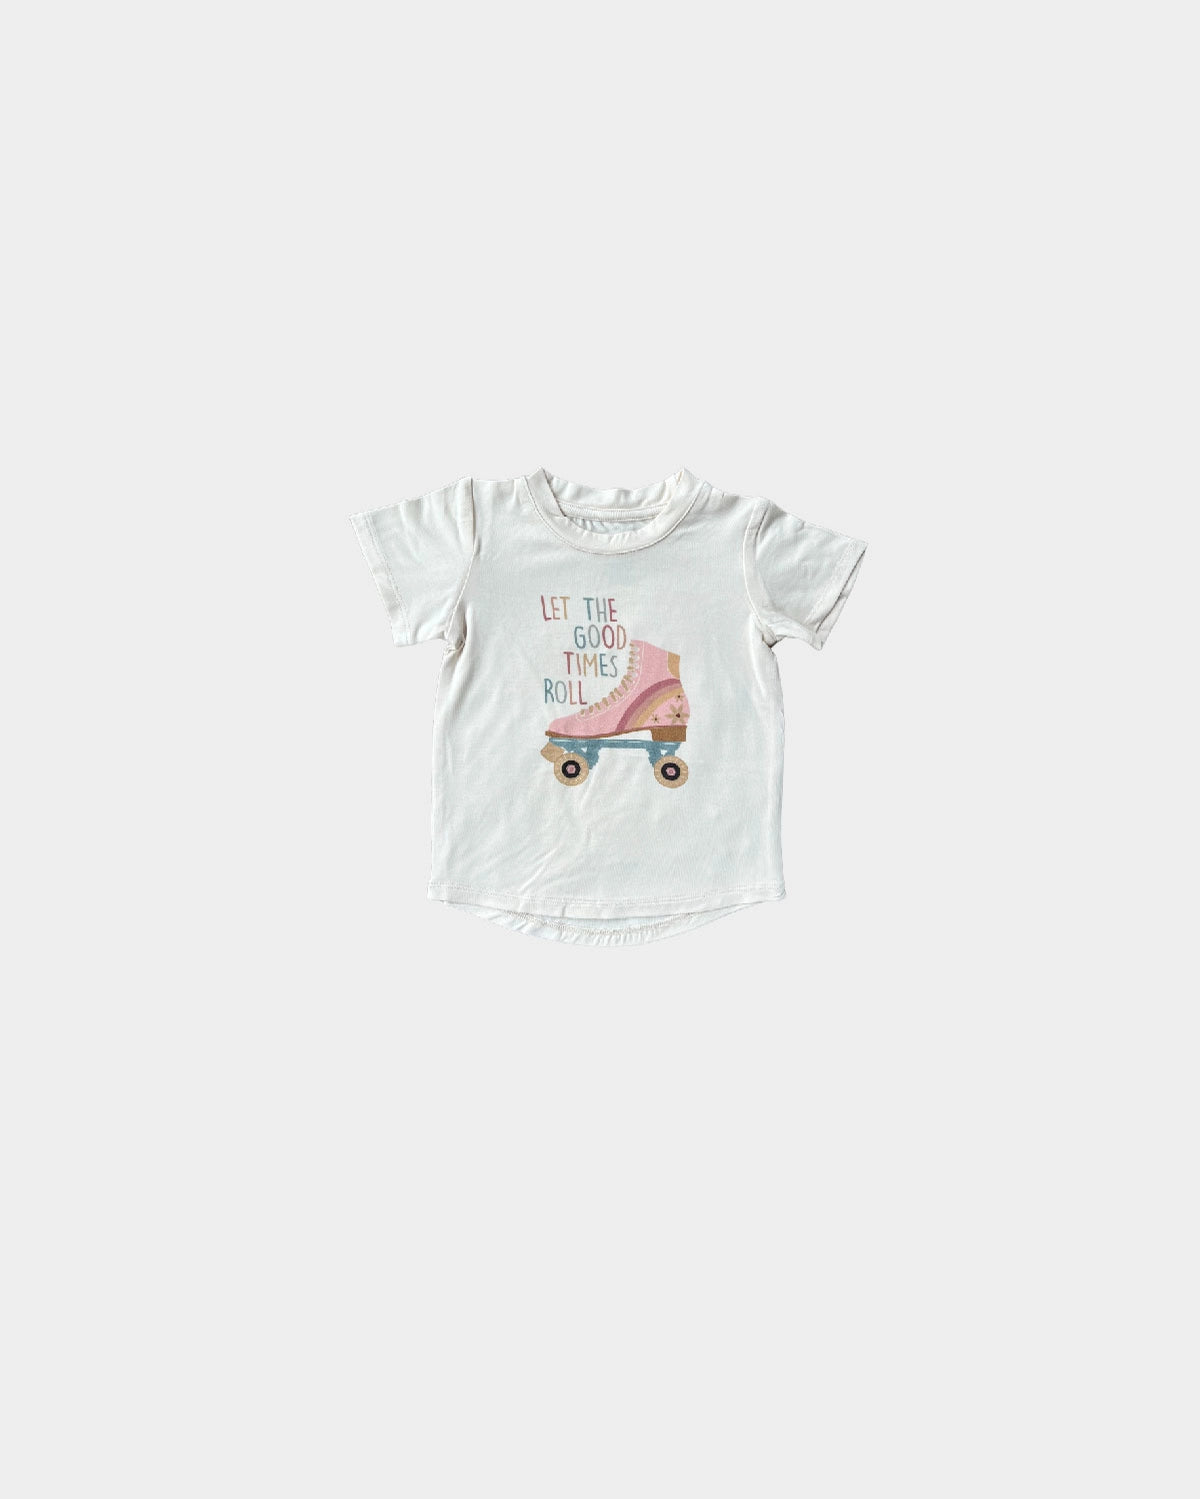 Babysprouts Clothing Company Girl's Bamboo Tee - Let the Good Times Roll bamboo cotton